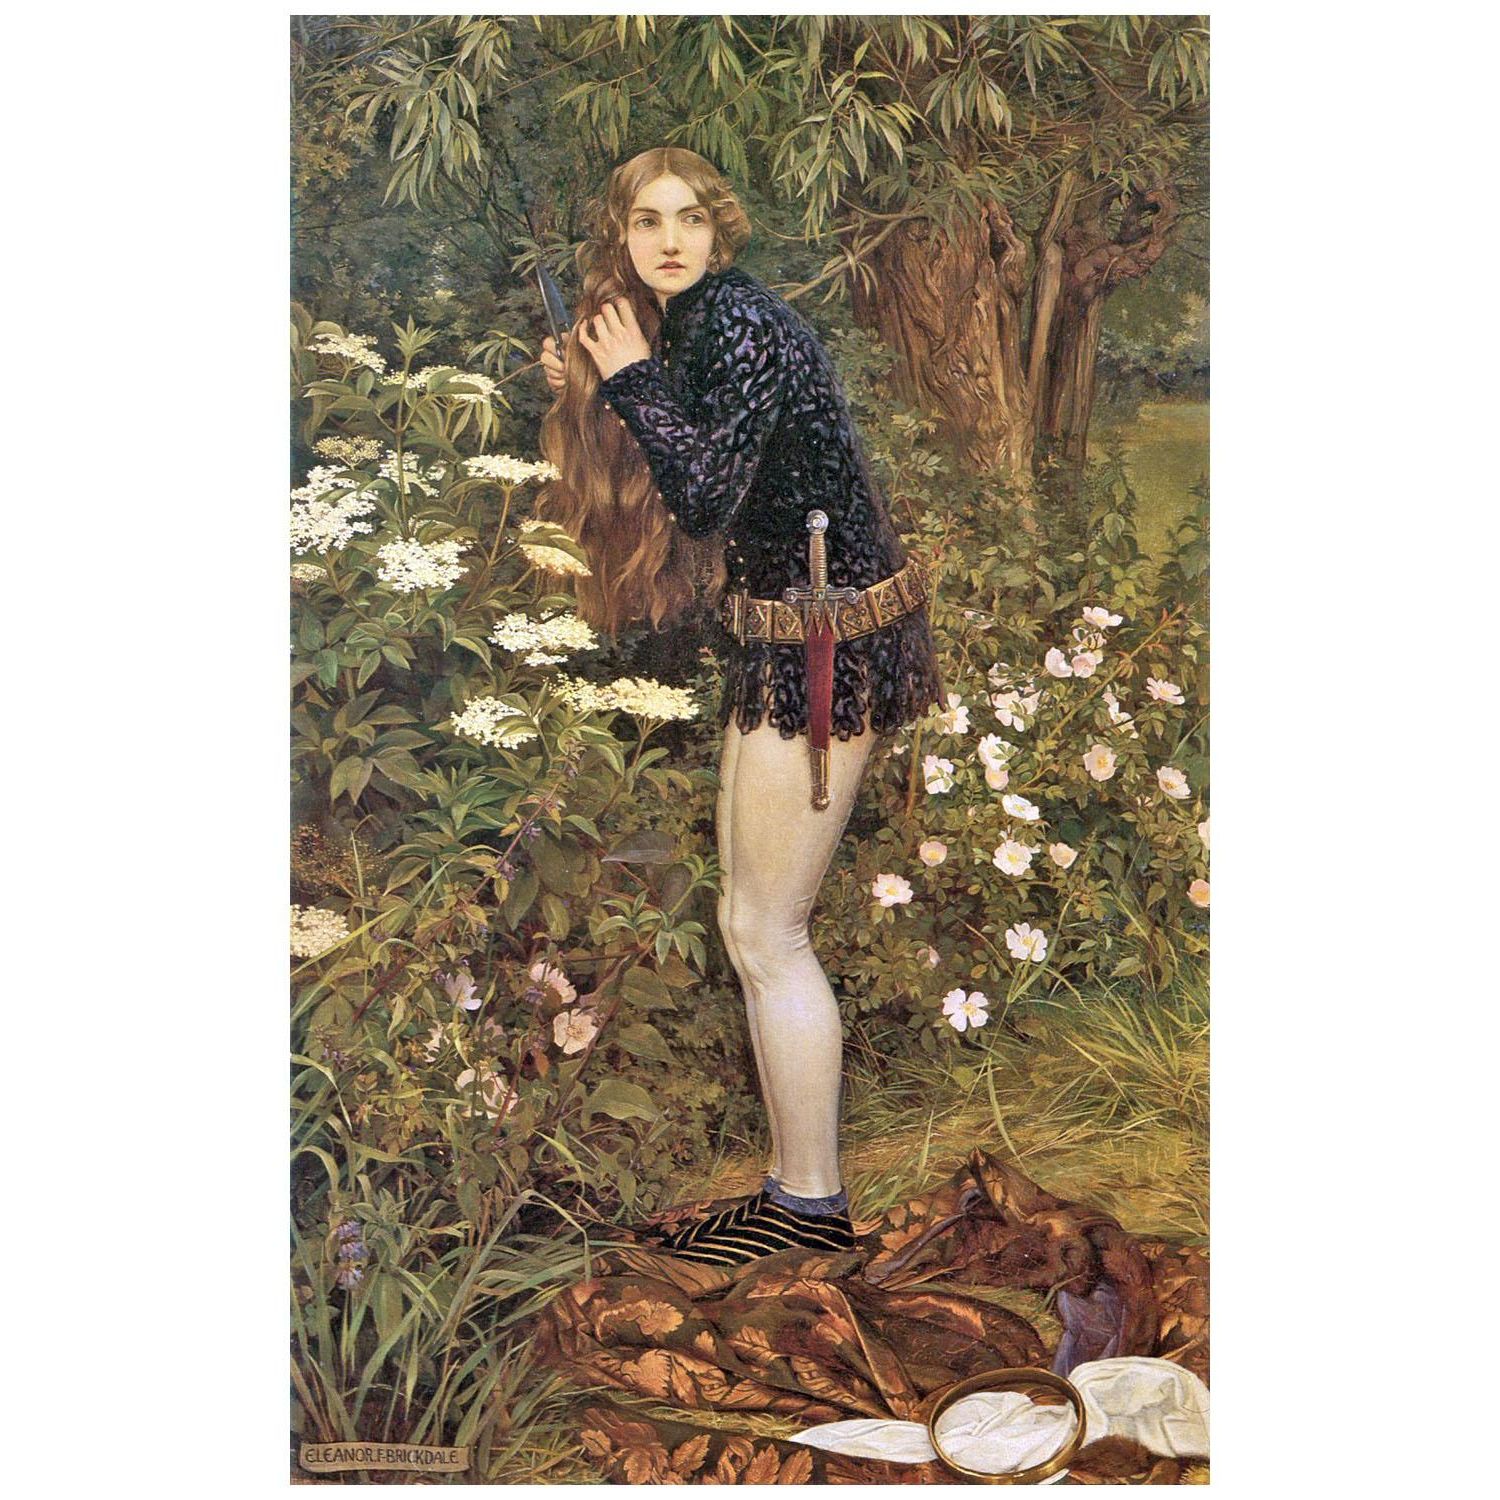 Eleanor Fortescue-Brickdale. The Little Foot Page. 1905